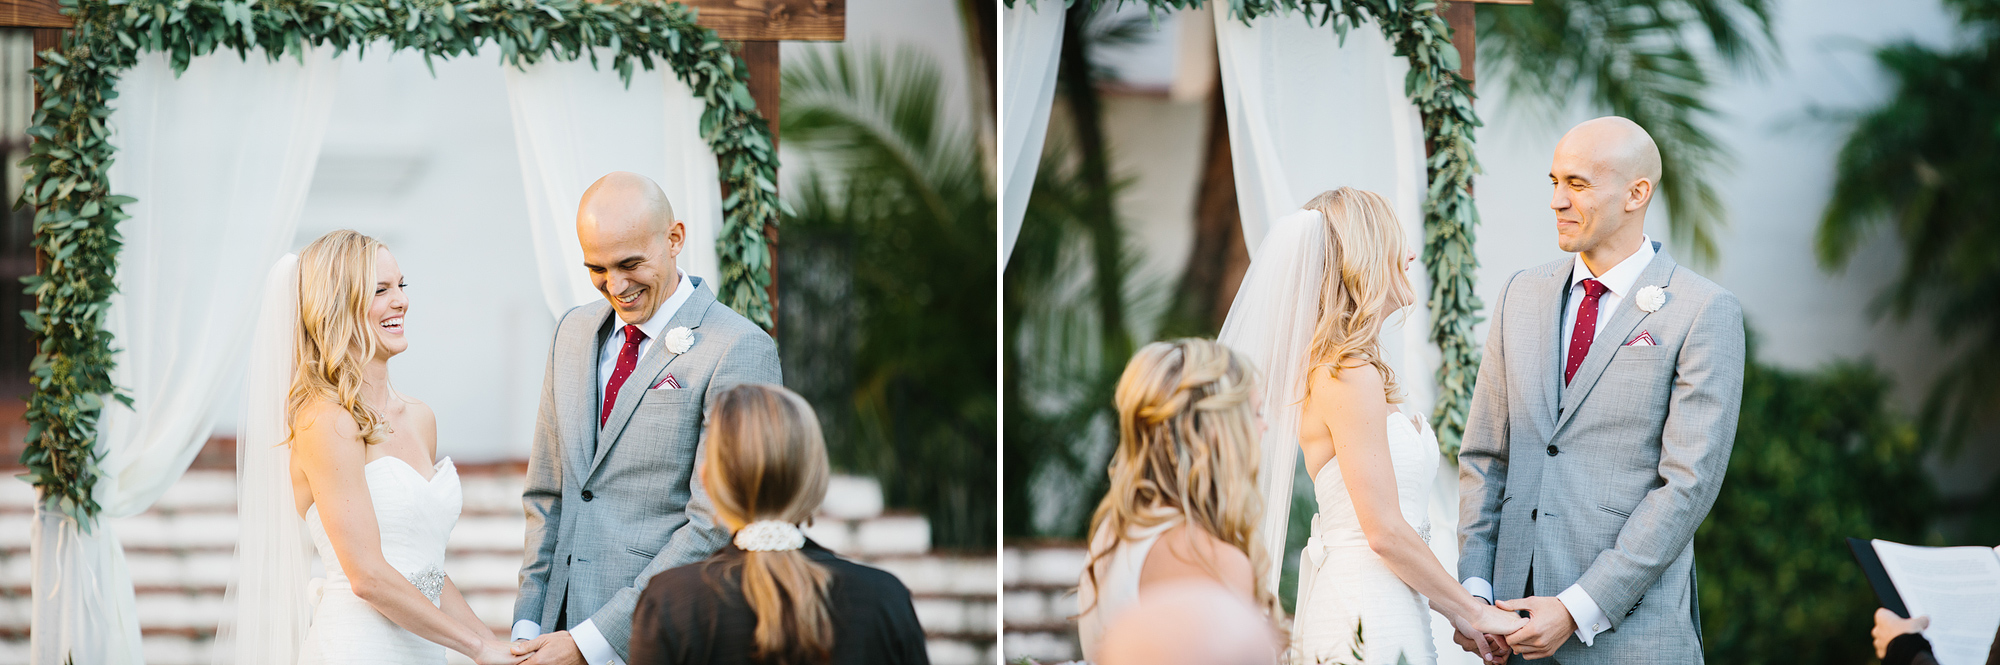 Sweet photos of the couple during the wedding ceremony. 